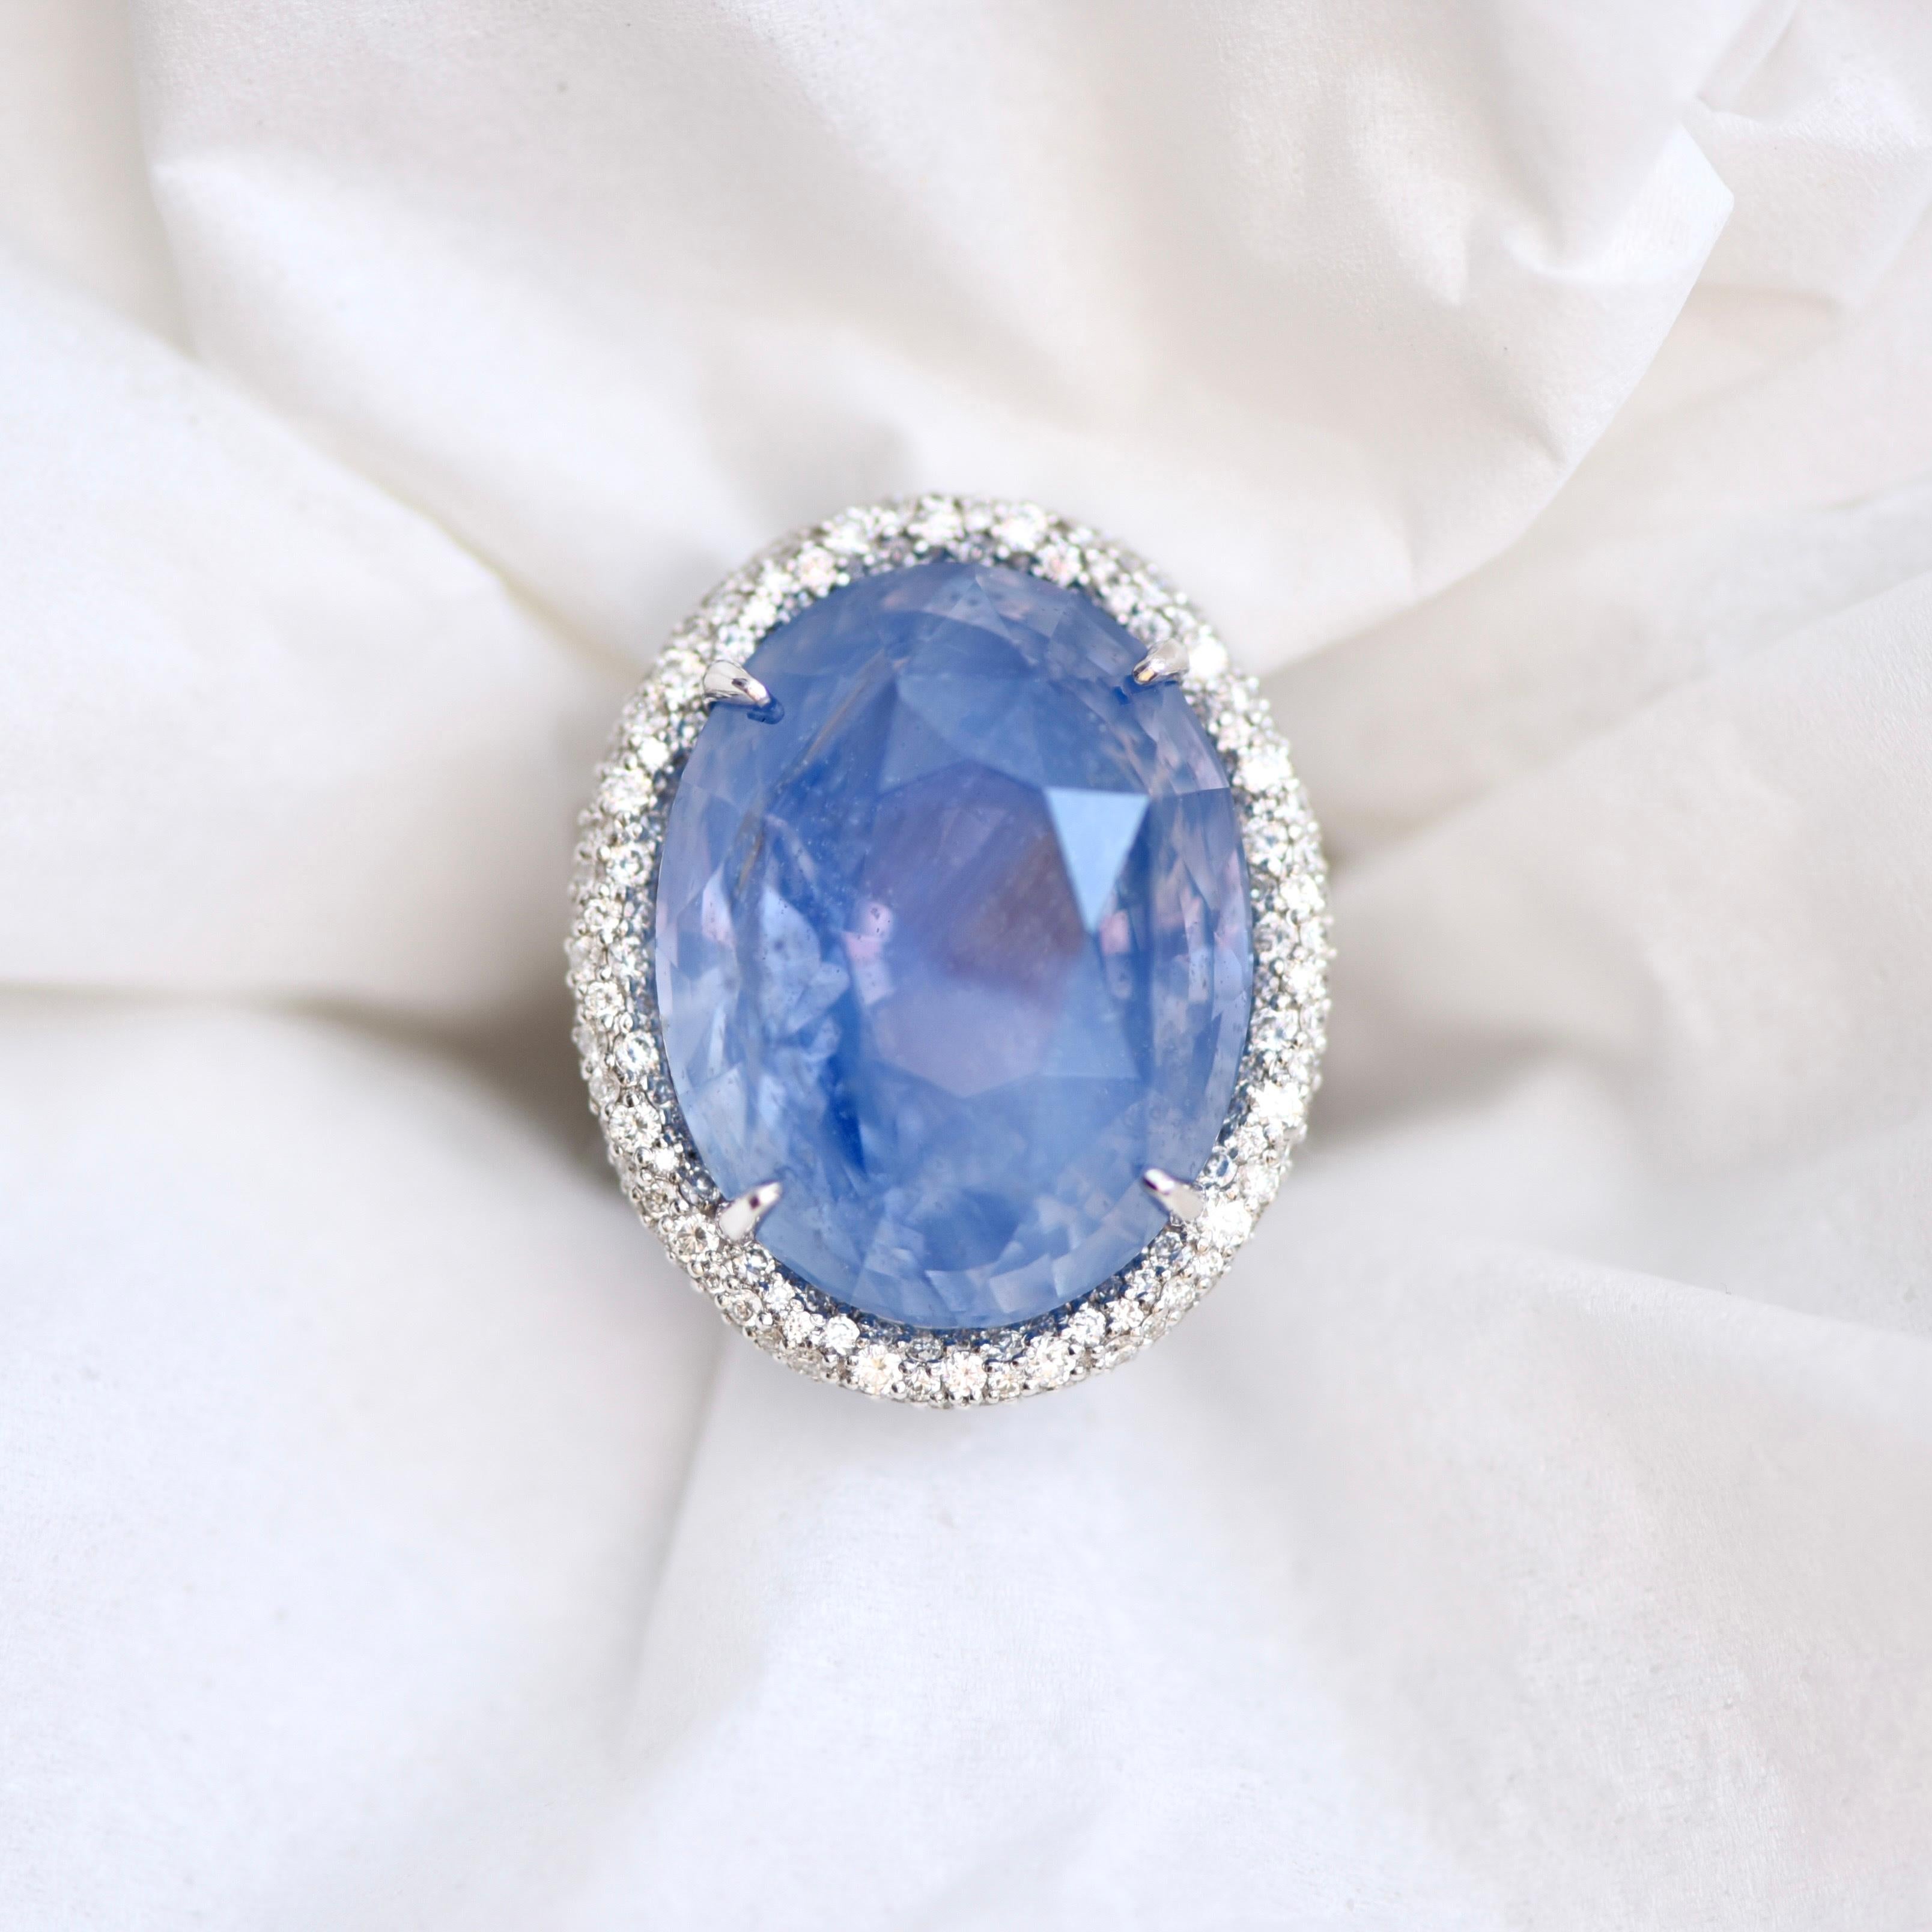 Contemporary 47.22 Carat Natural Sapphire Diamonds 18 Karat White Gold Cocktail Ring by D&A For Sale